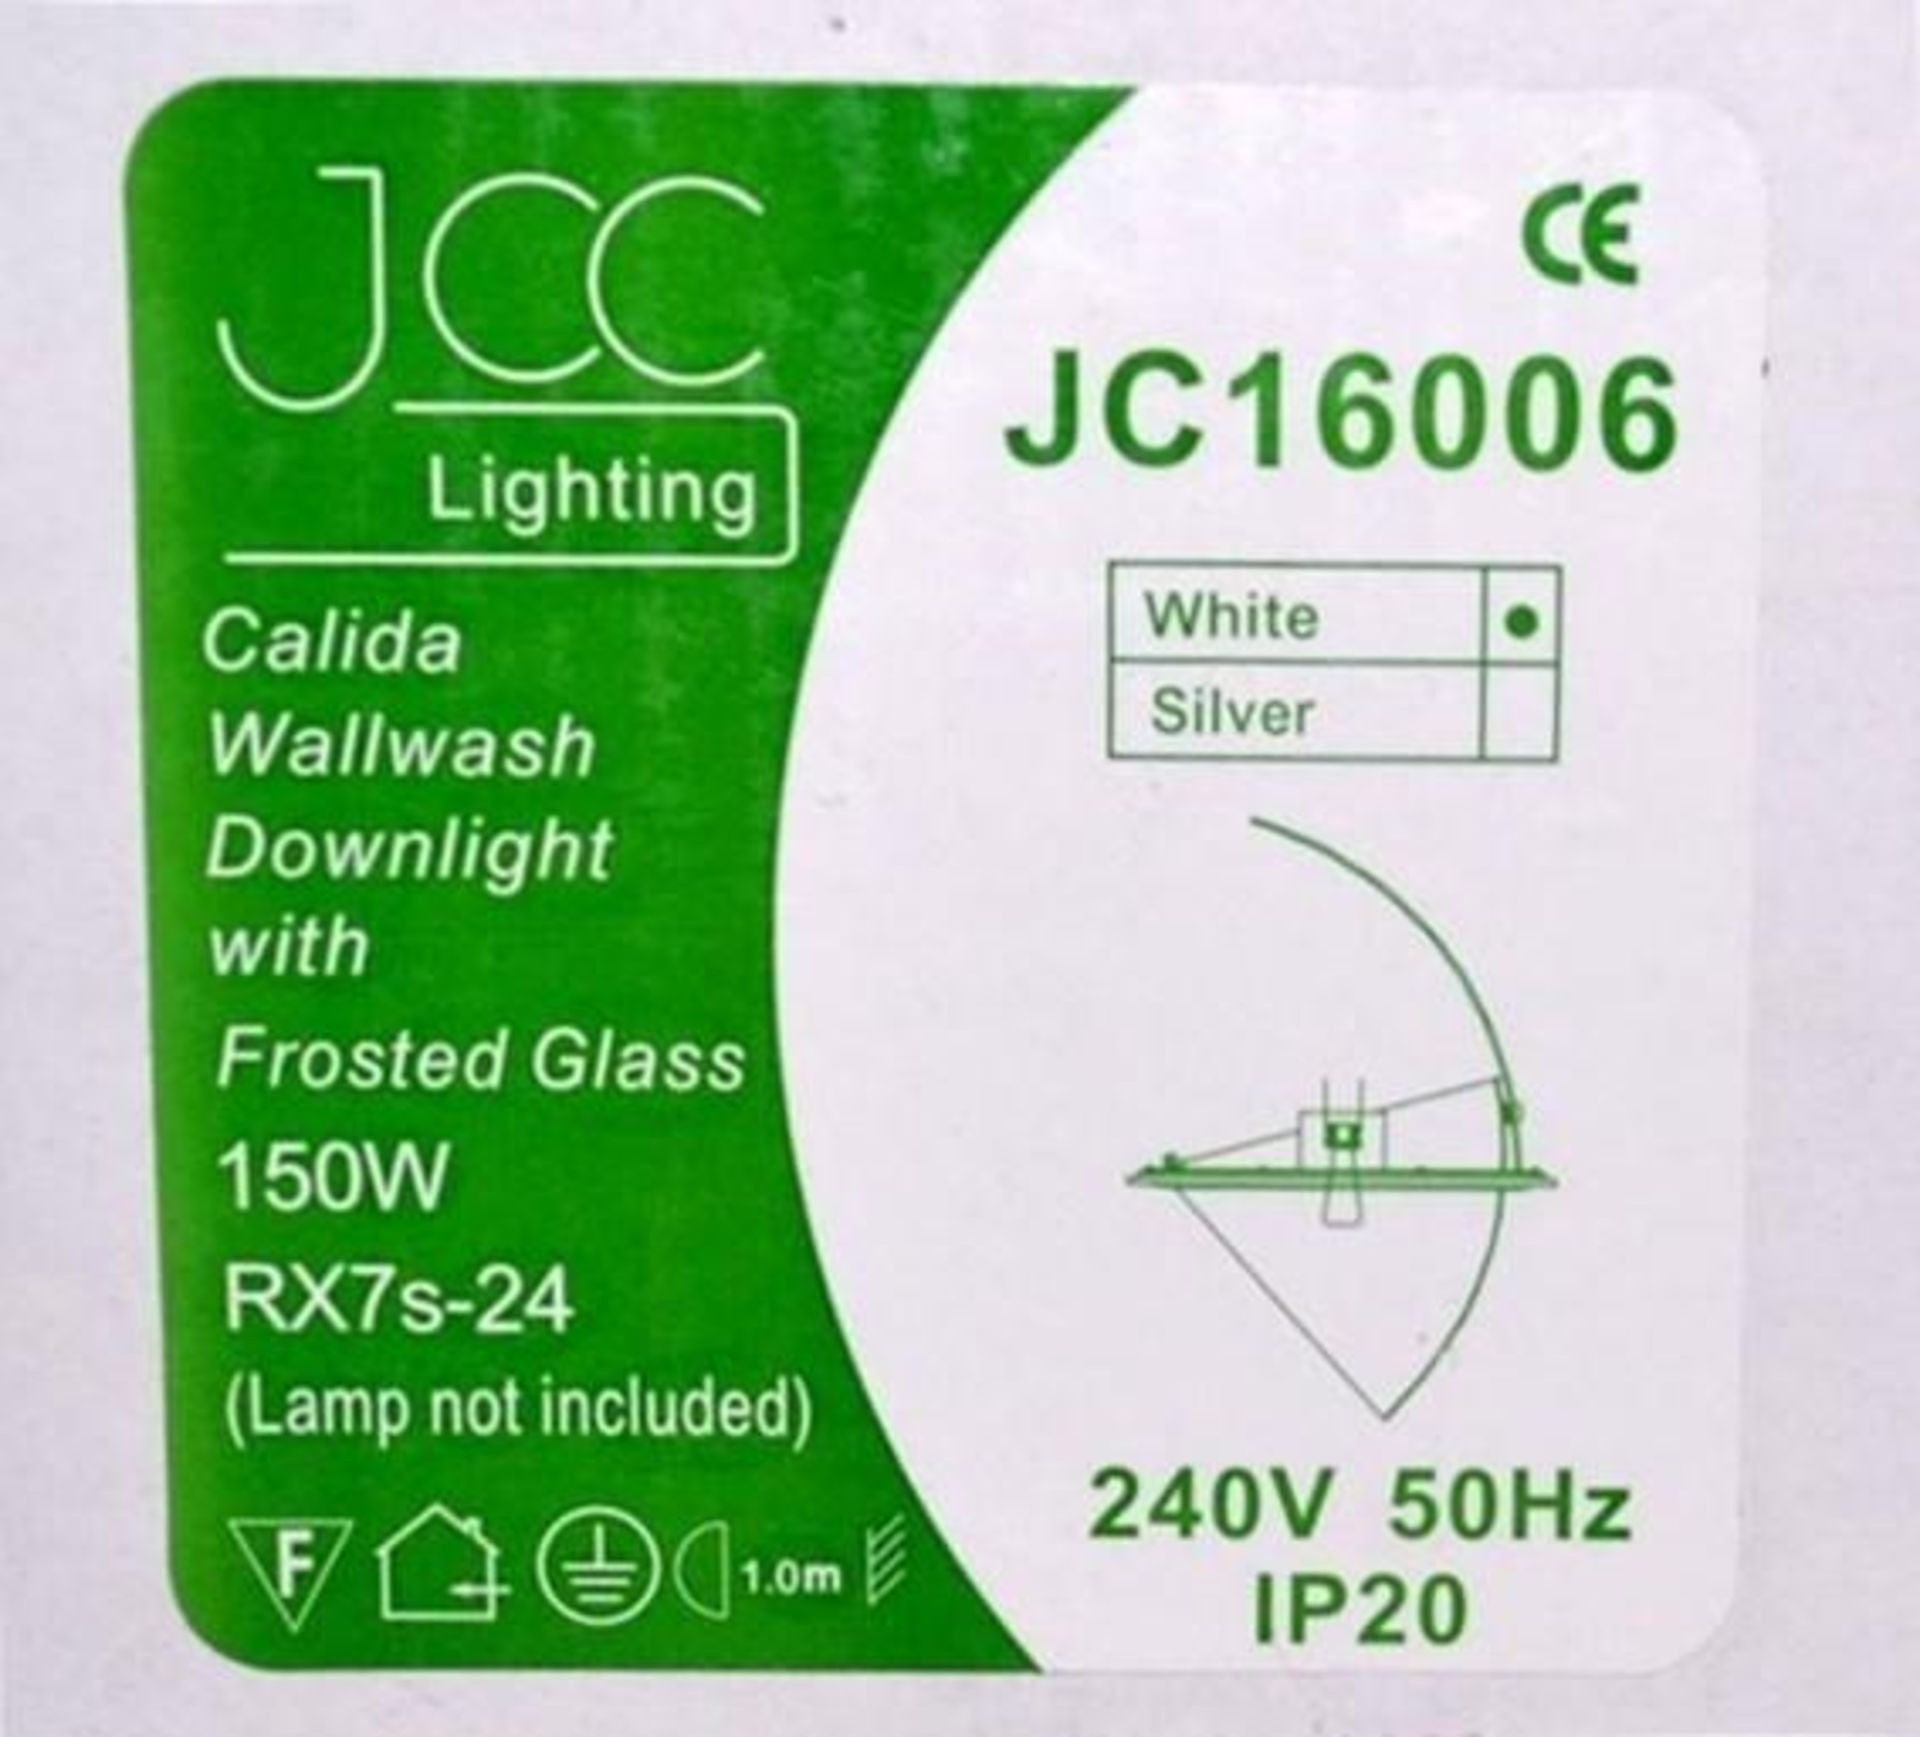 5 x JCC Lighting JC16006 Calida Large Wallwash Downlights With Frosted Lens - Colour: White - New/ - Image 6 of 7